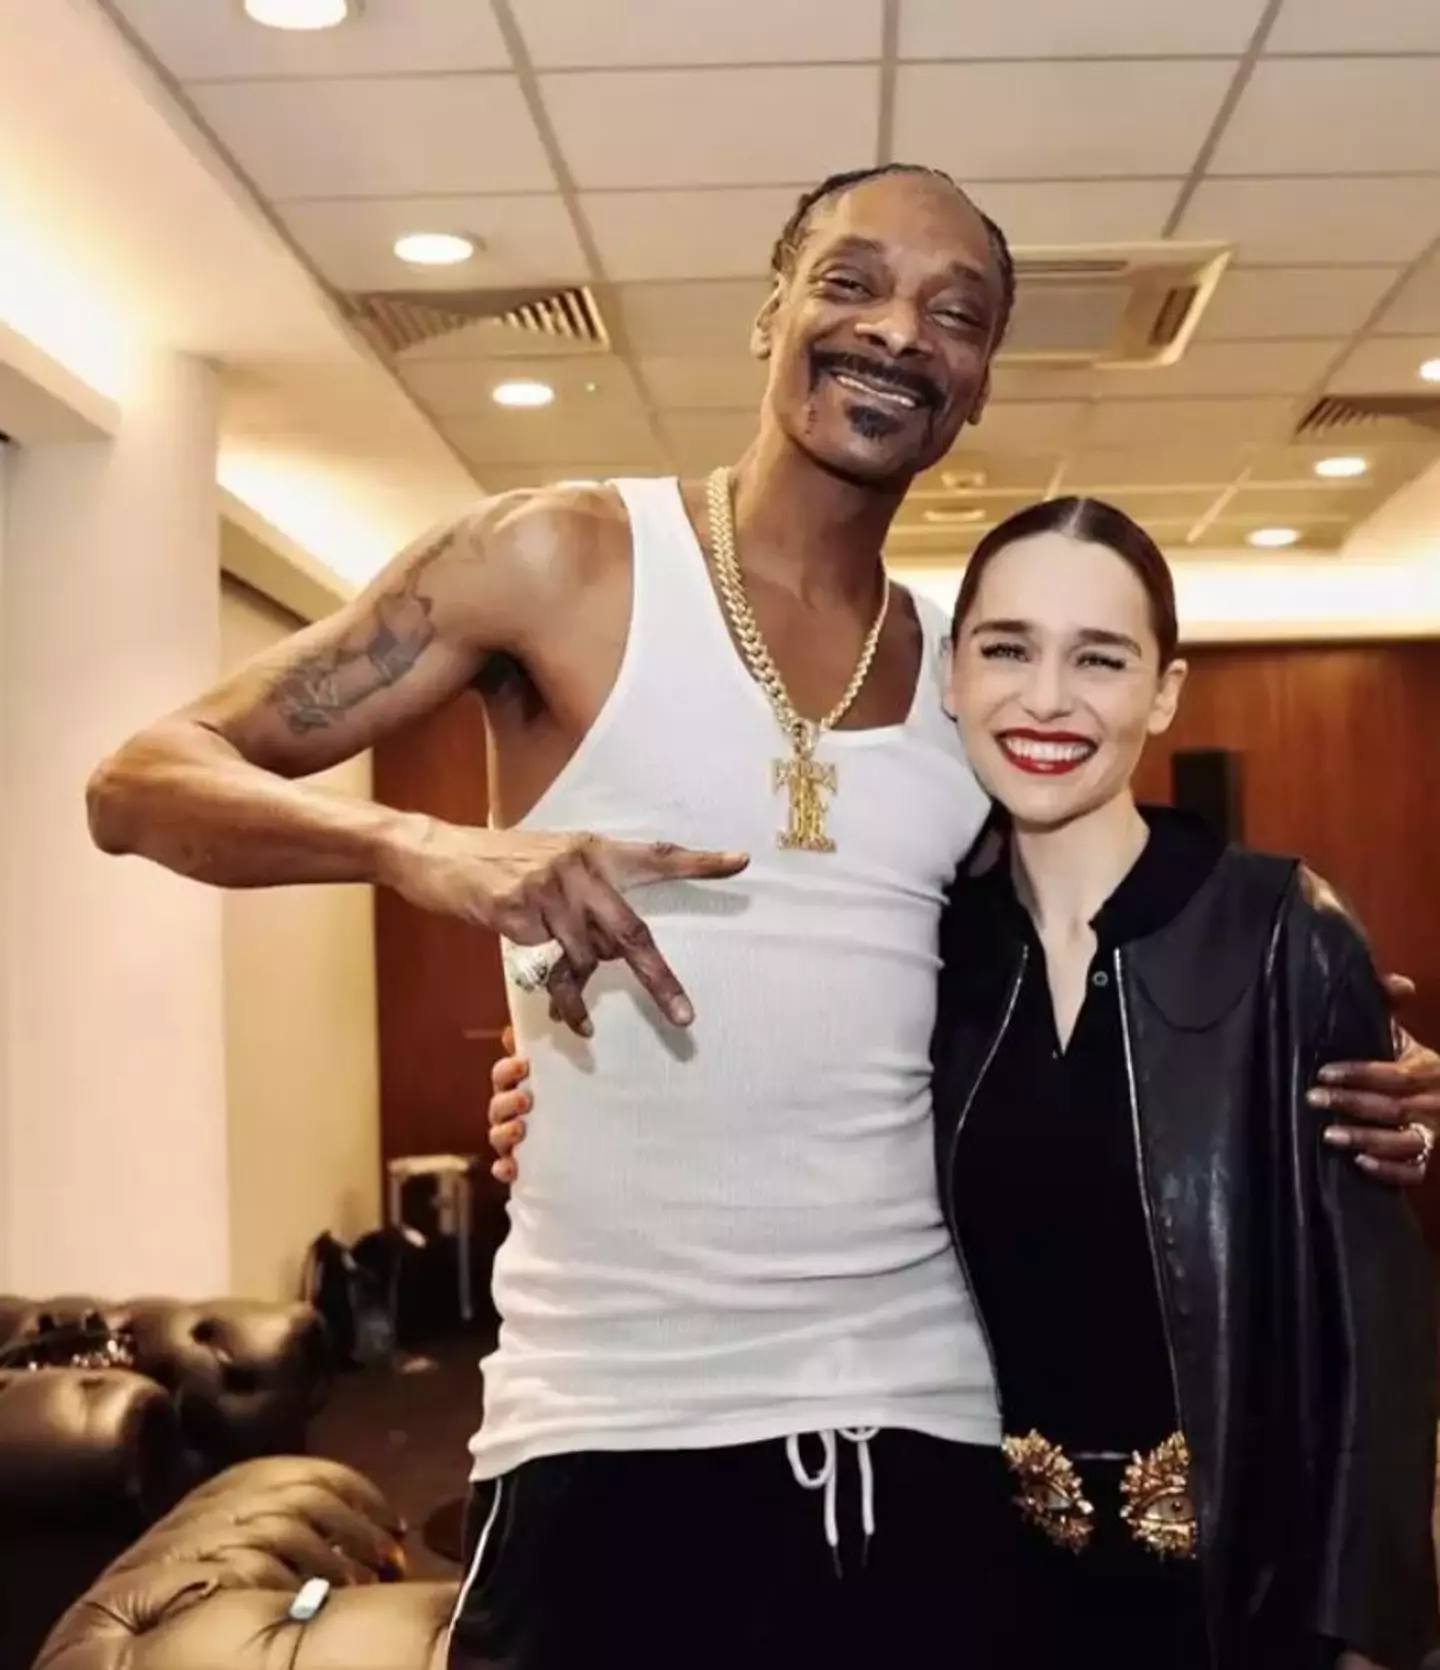 Snoop Dogg and Emilia Clarke formed an unlikely friendship.